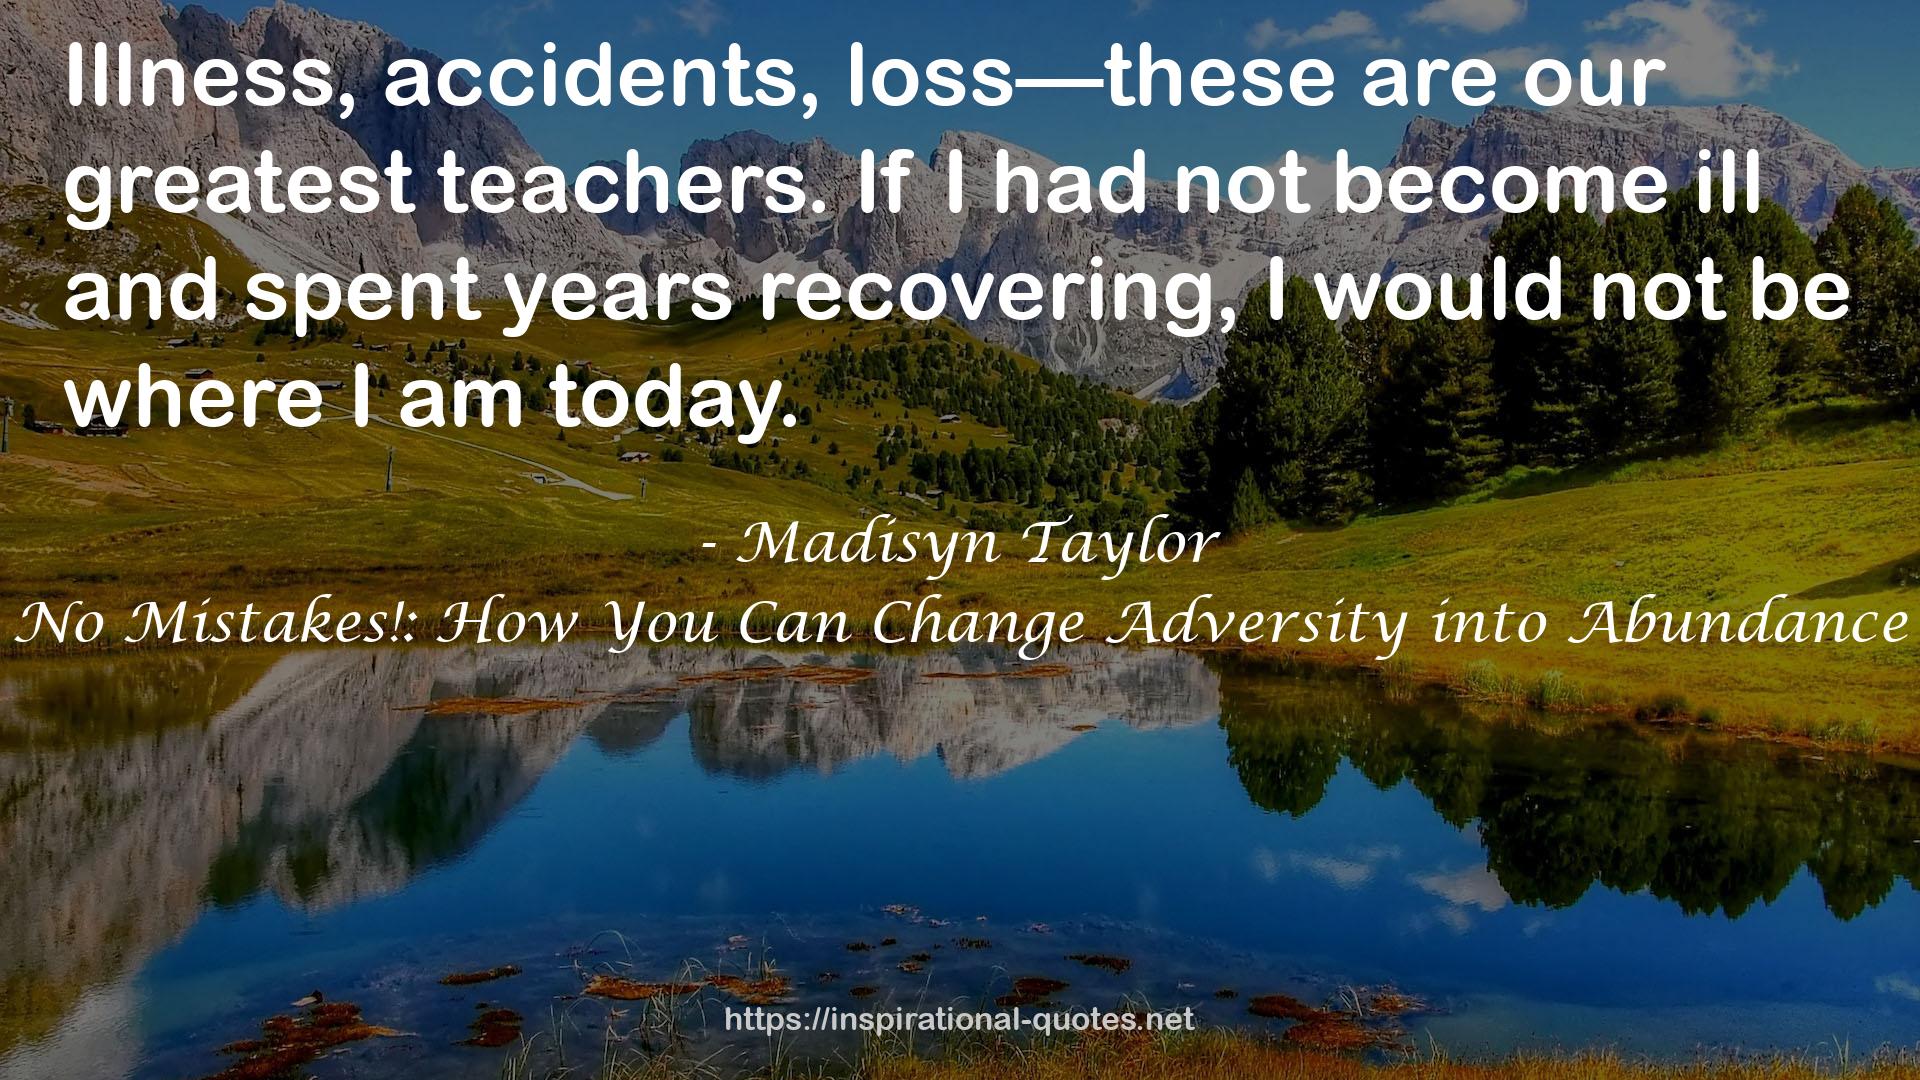 No Mistakes!: How You Can Change Adversity into Abundance QUOTES